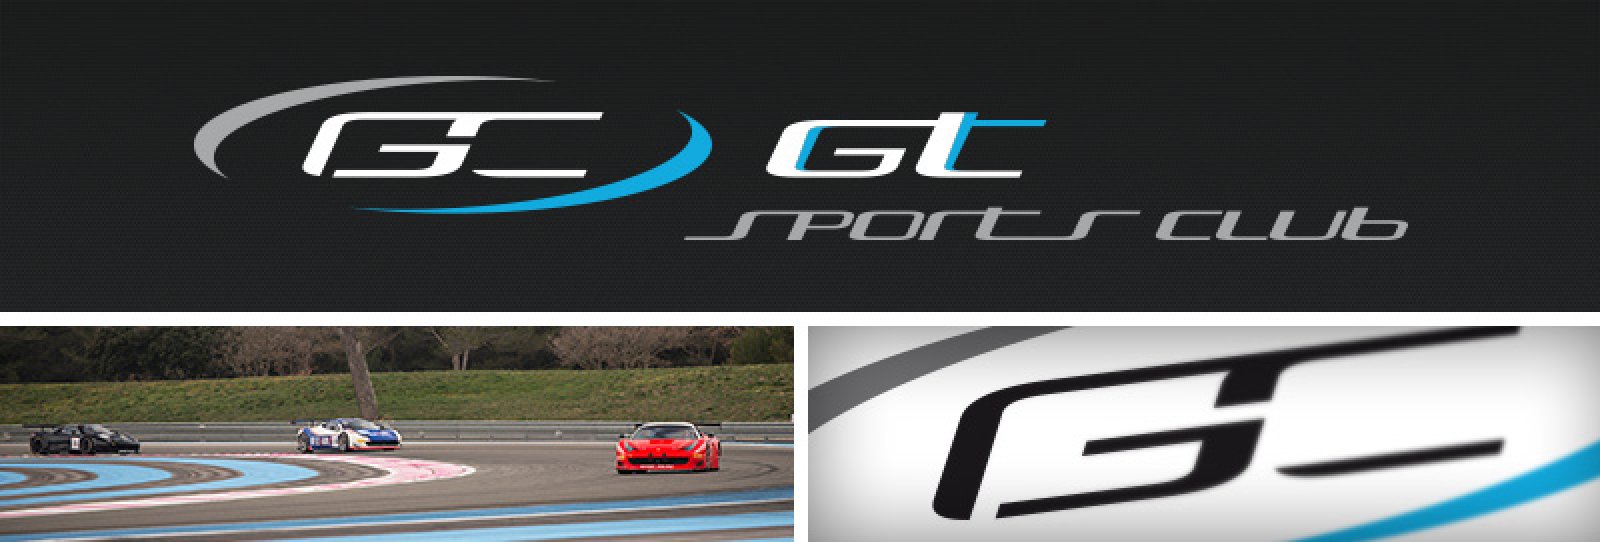 SRO Motorsports Group introduces GT Sports Club, a new Series exclusively for Bronze drivers